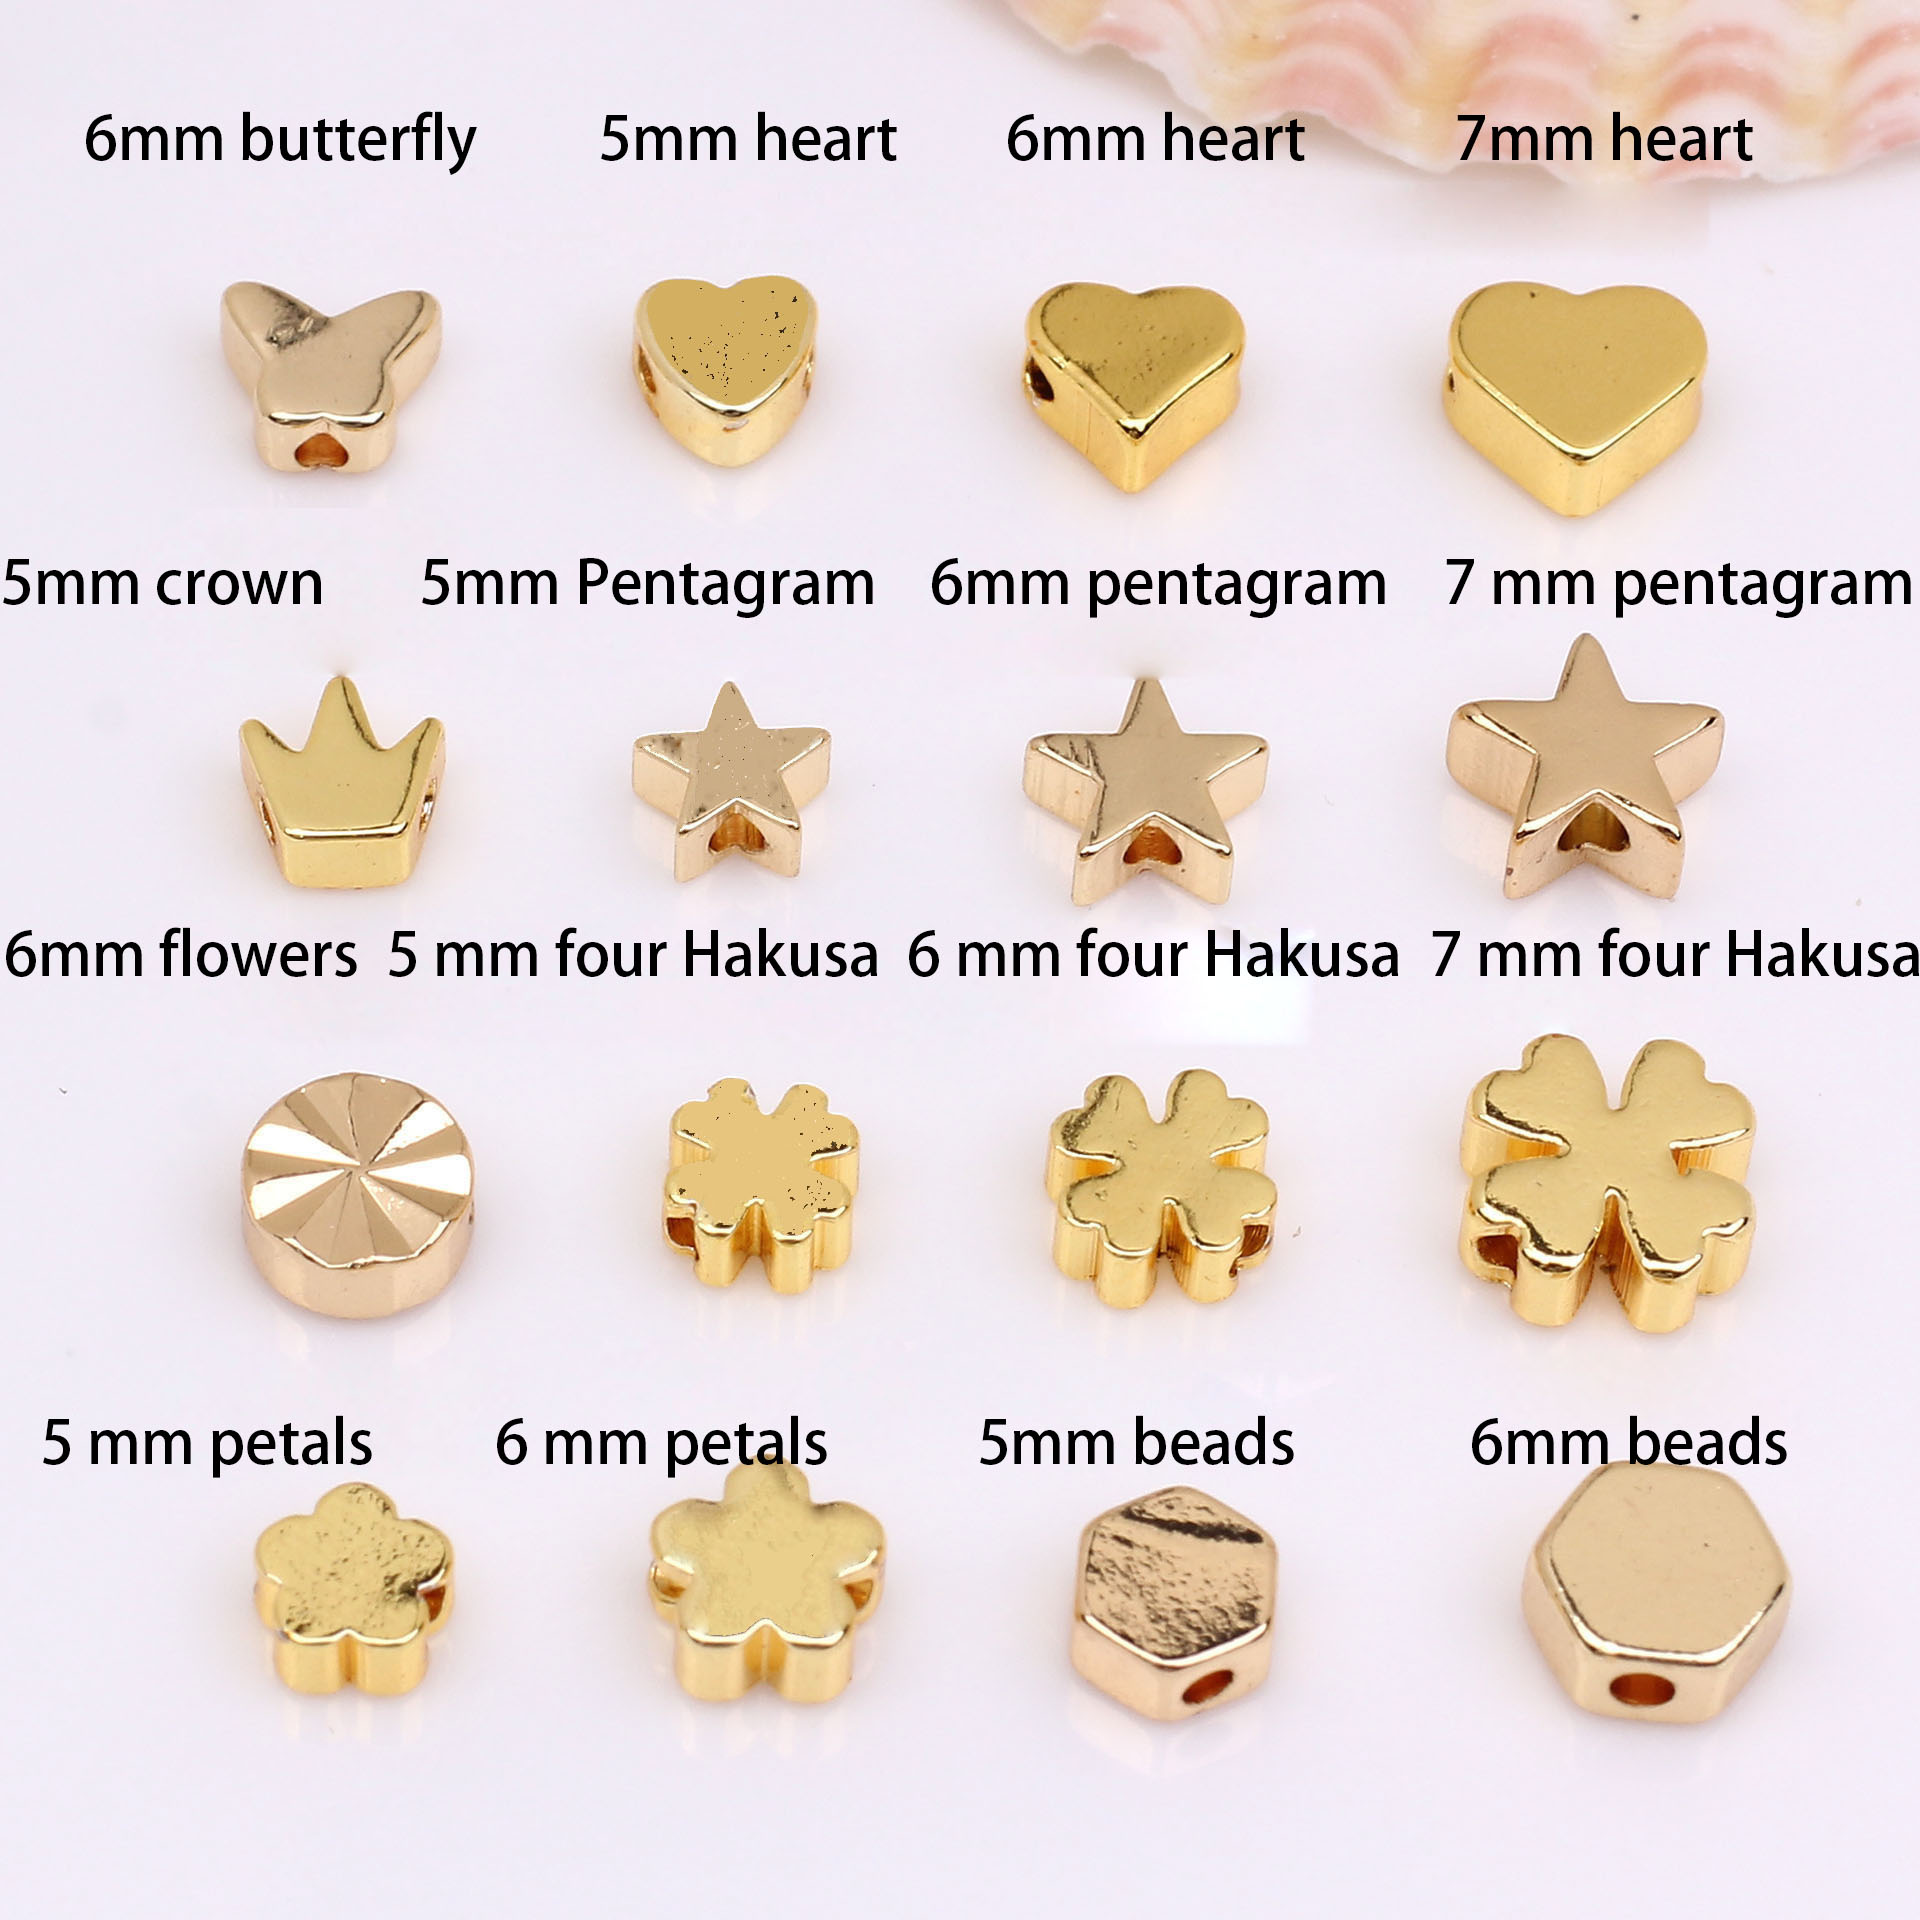 14-carat gold, color retention 6mm butterfly